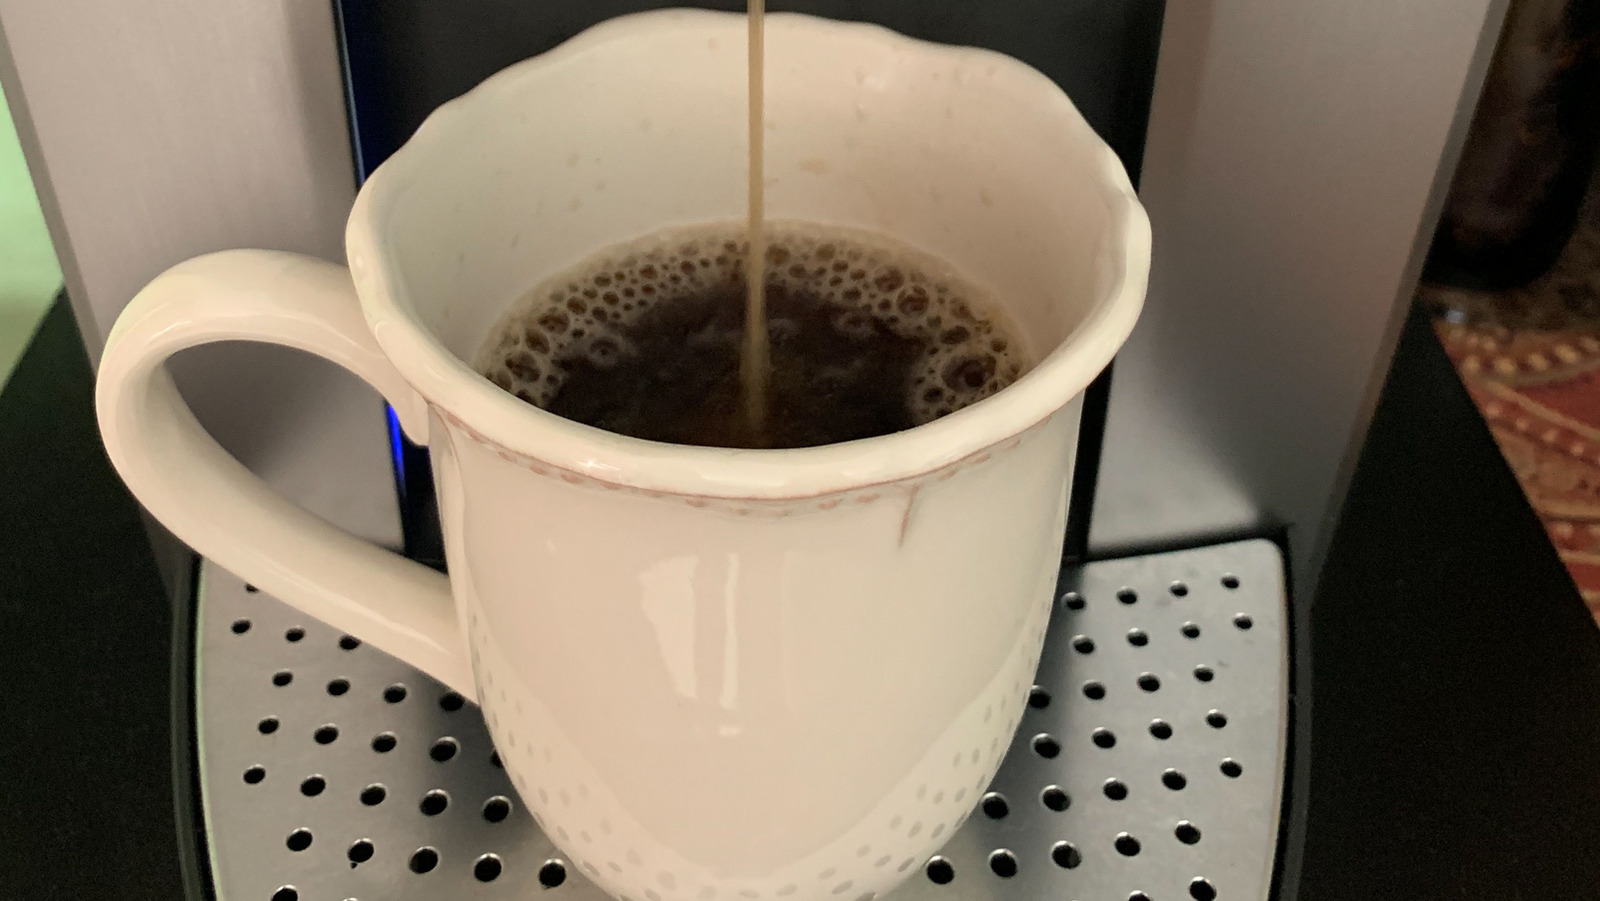 https://www.mashed.com/img/gallery/the-best-single-serve-coffee-makers-in-2022/l-intro-1652212855.jpg